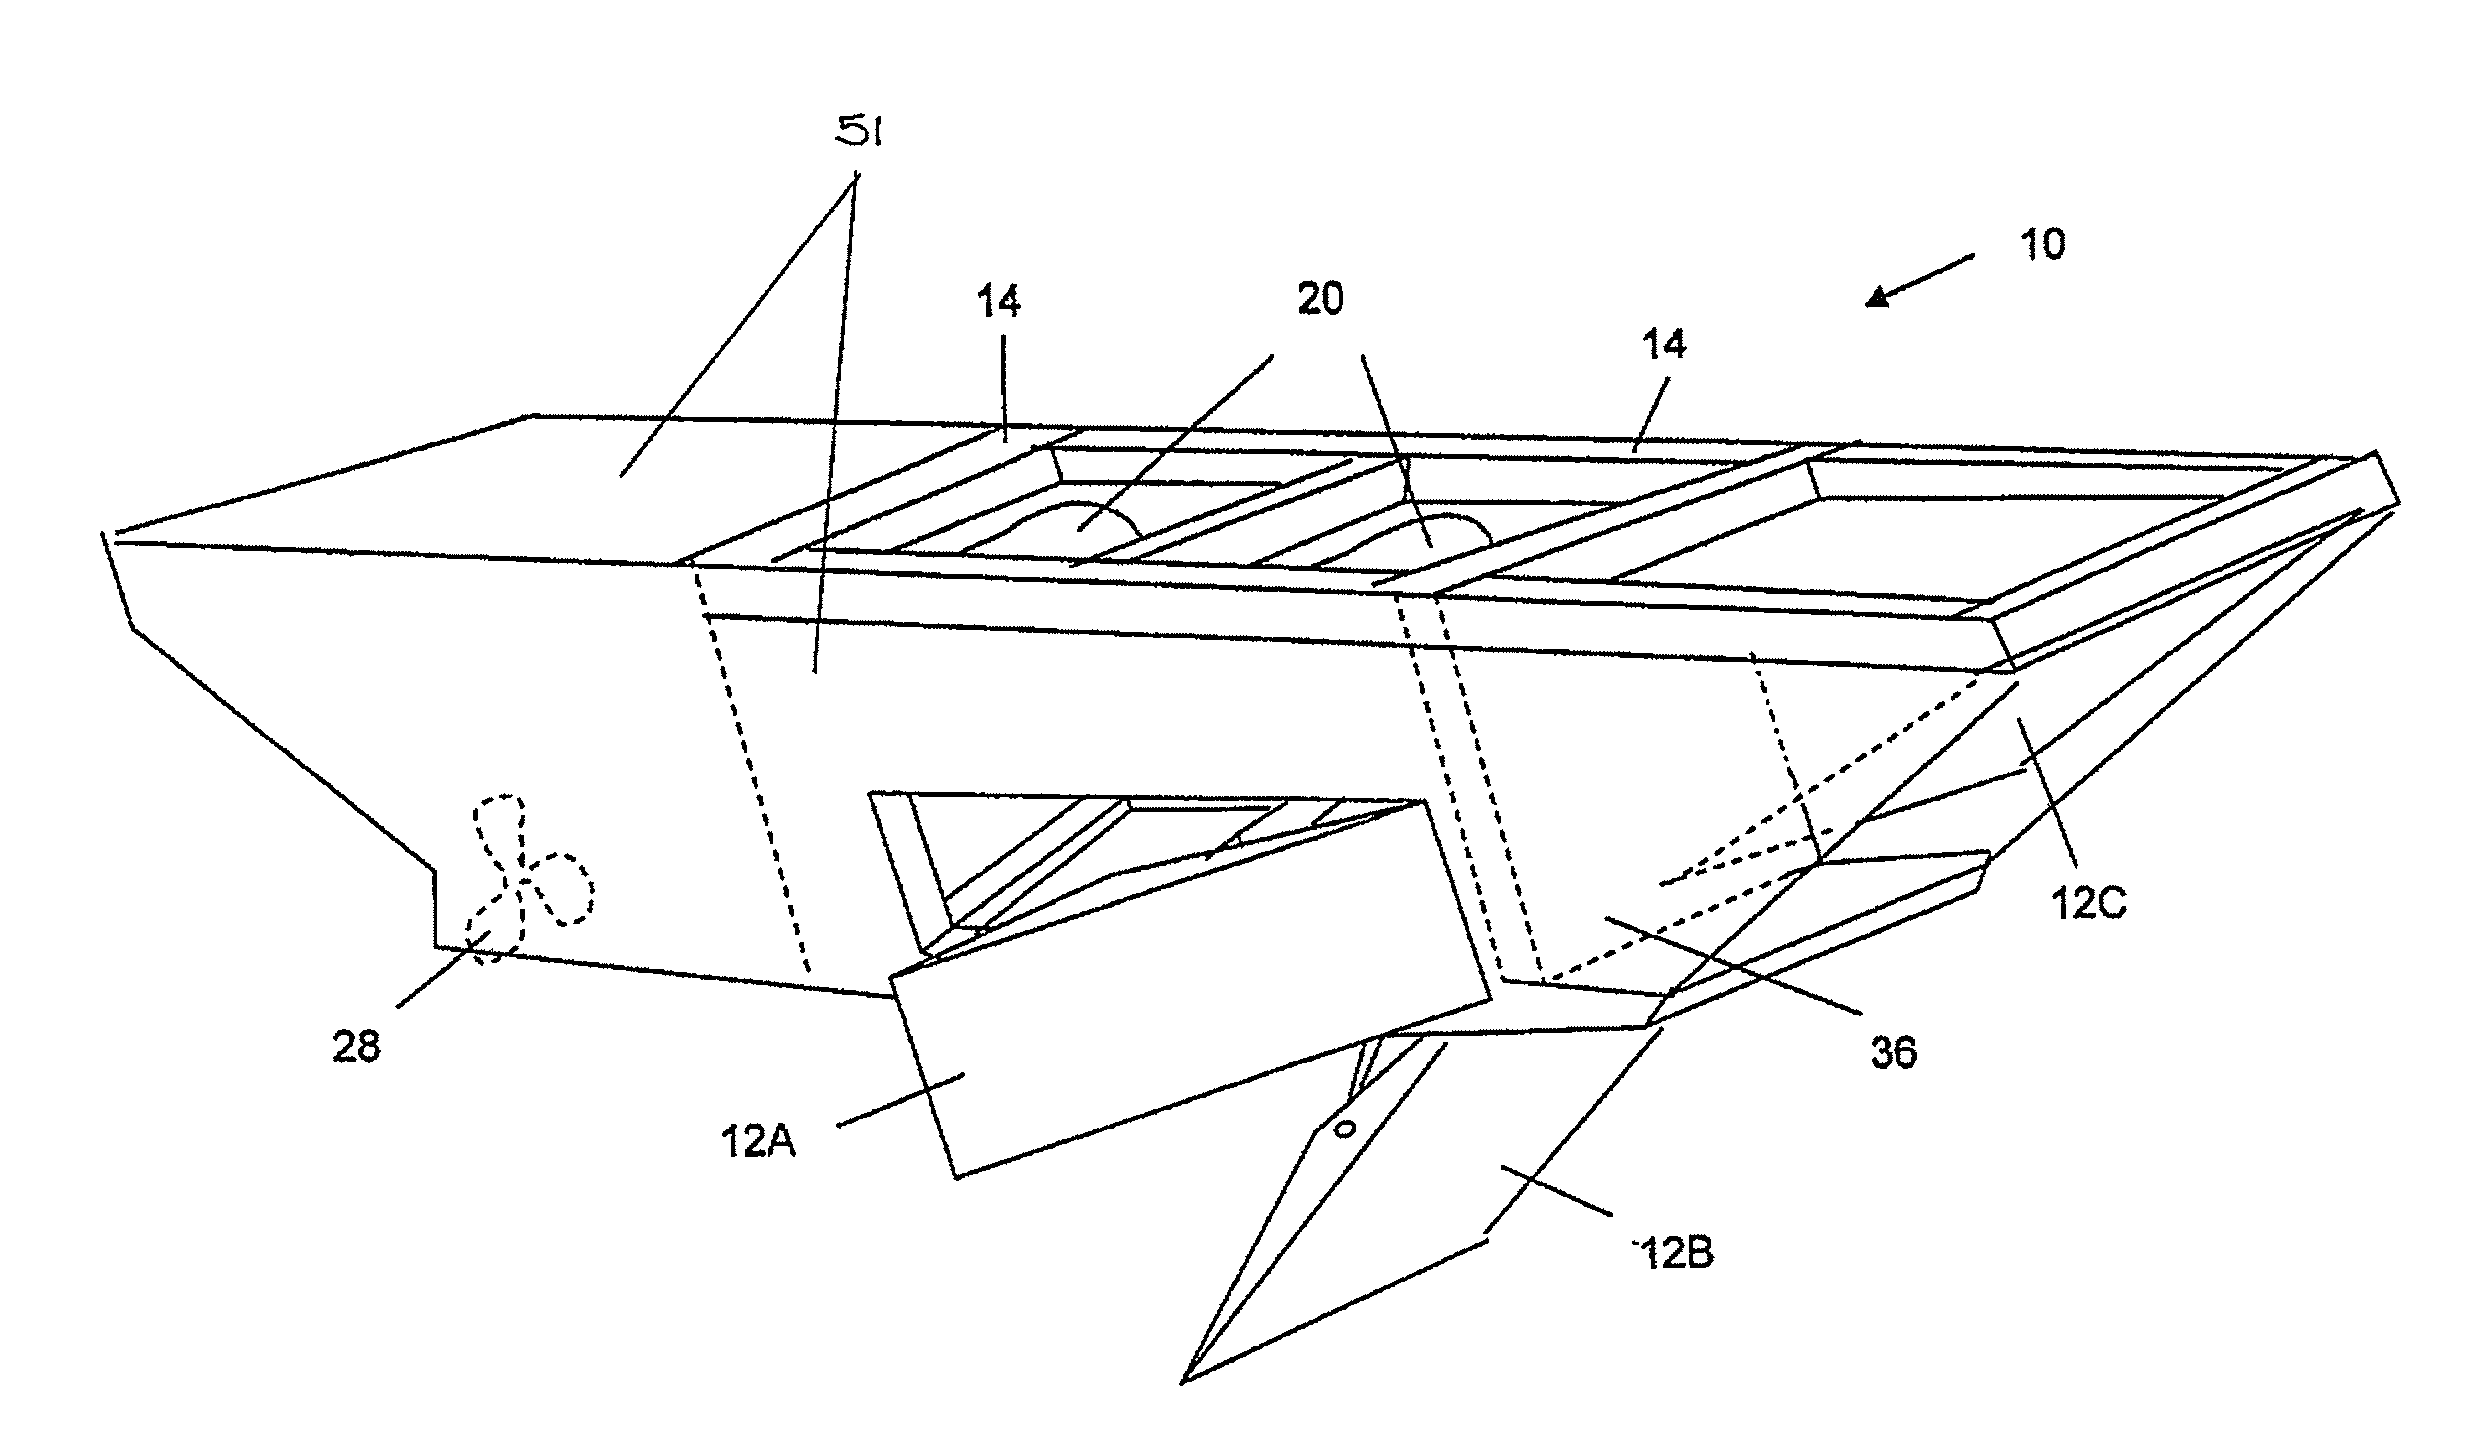 Method for changing the direction of travel of a watercraft and apparatus therefor